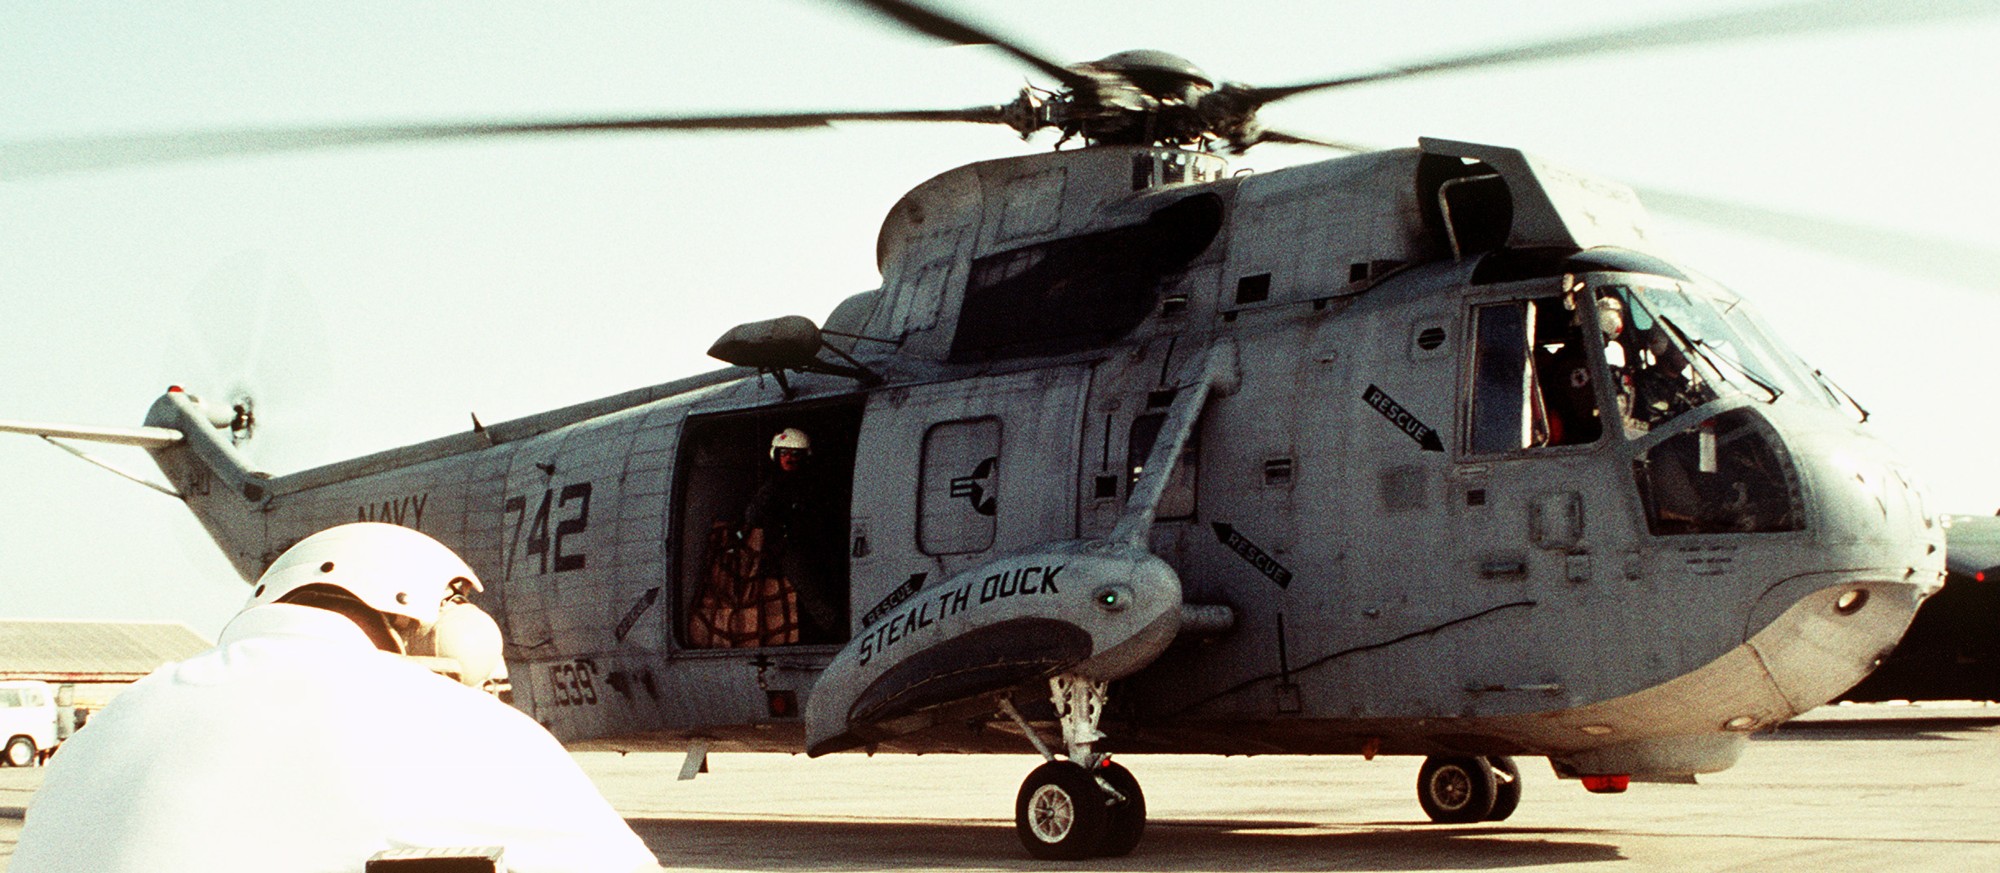 hc-2 fleet angels helicopter combat support squadron us navy sh-3g sea king 30 desert storm